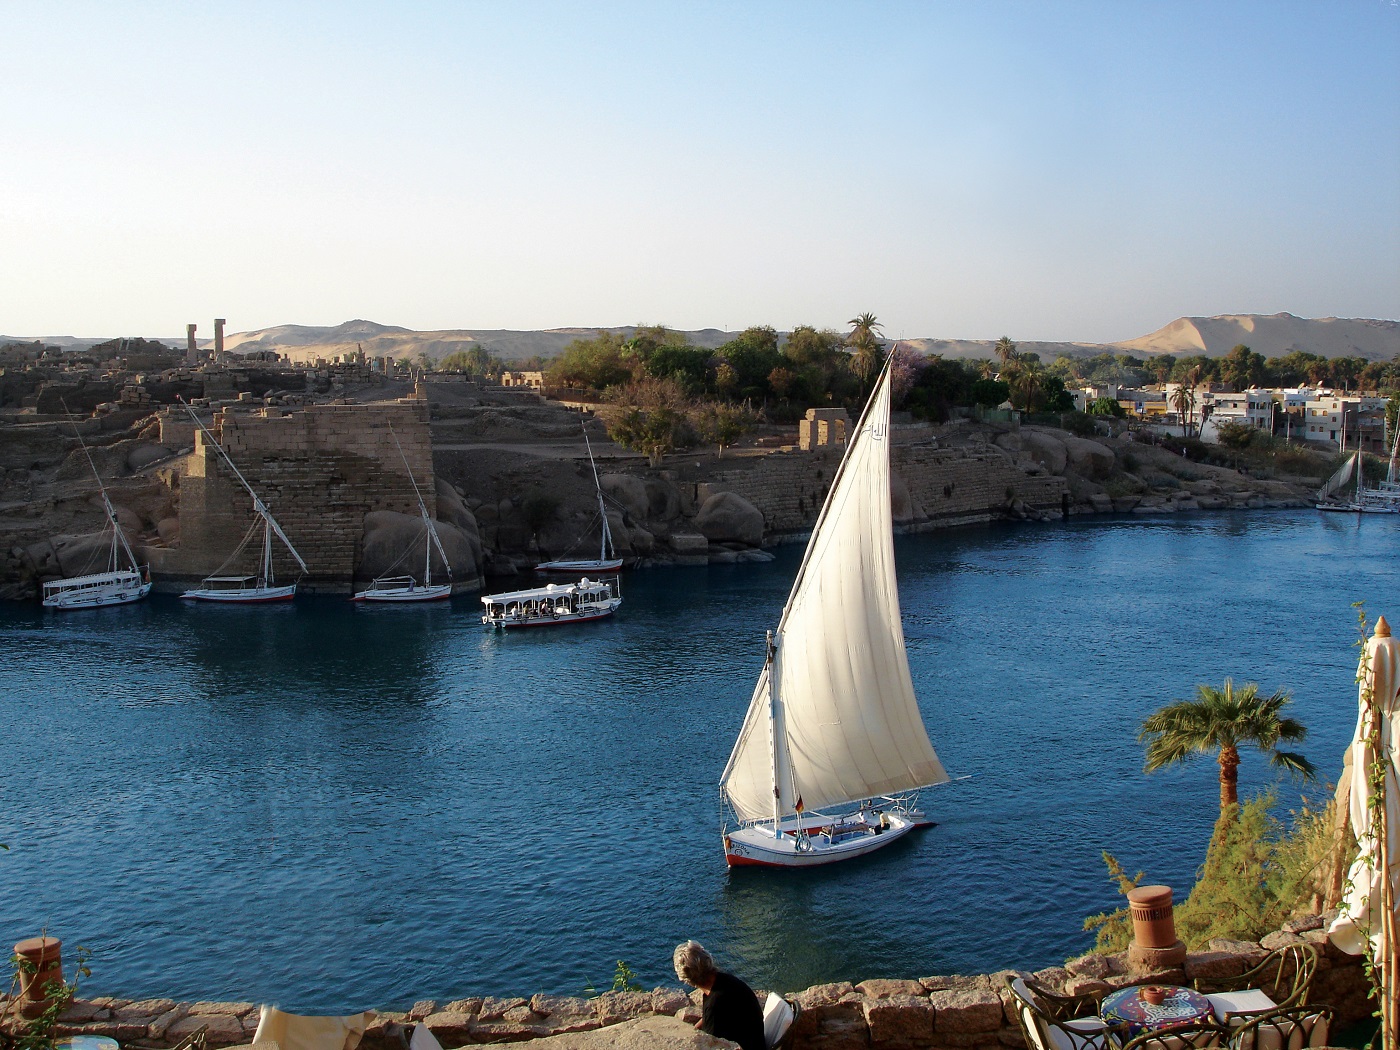 Egypt; Felucca ride on the Nile